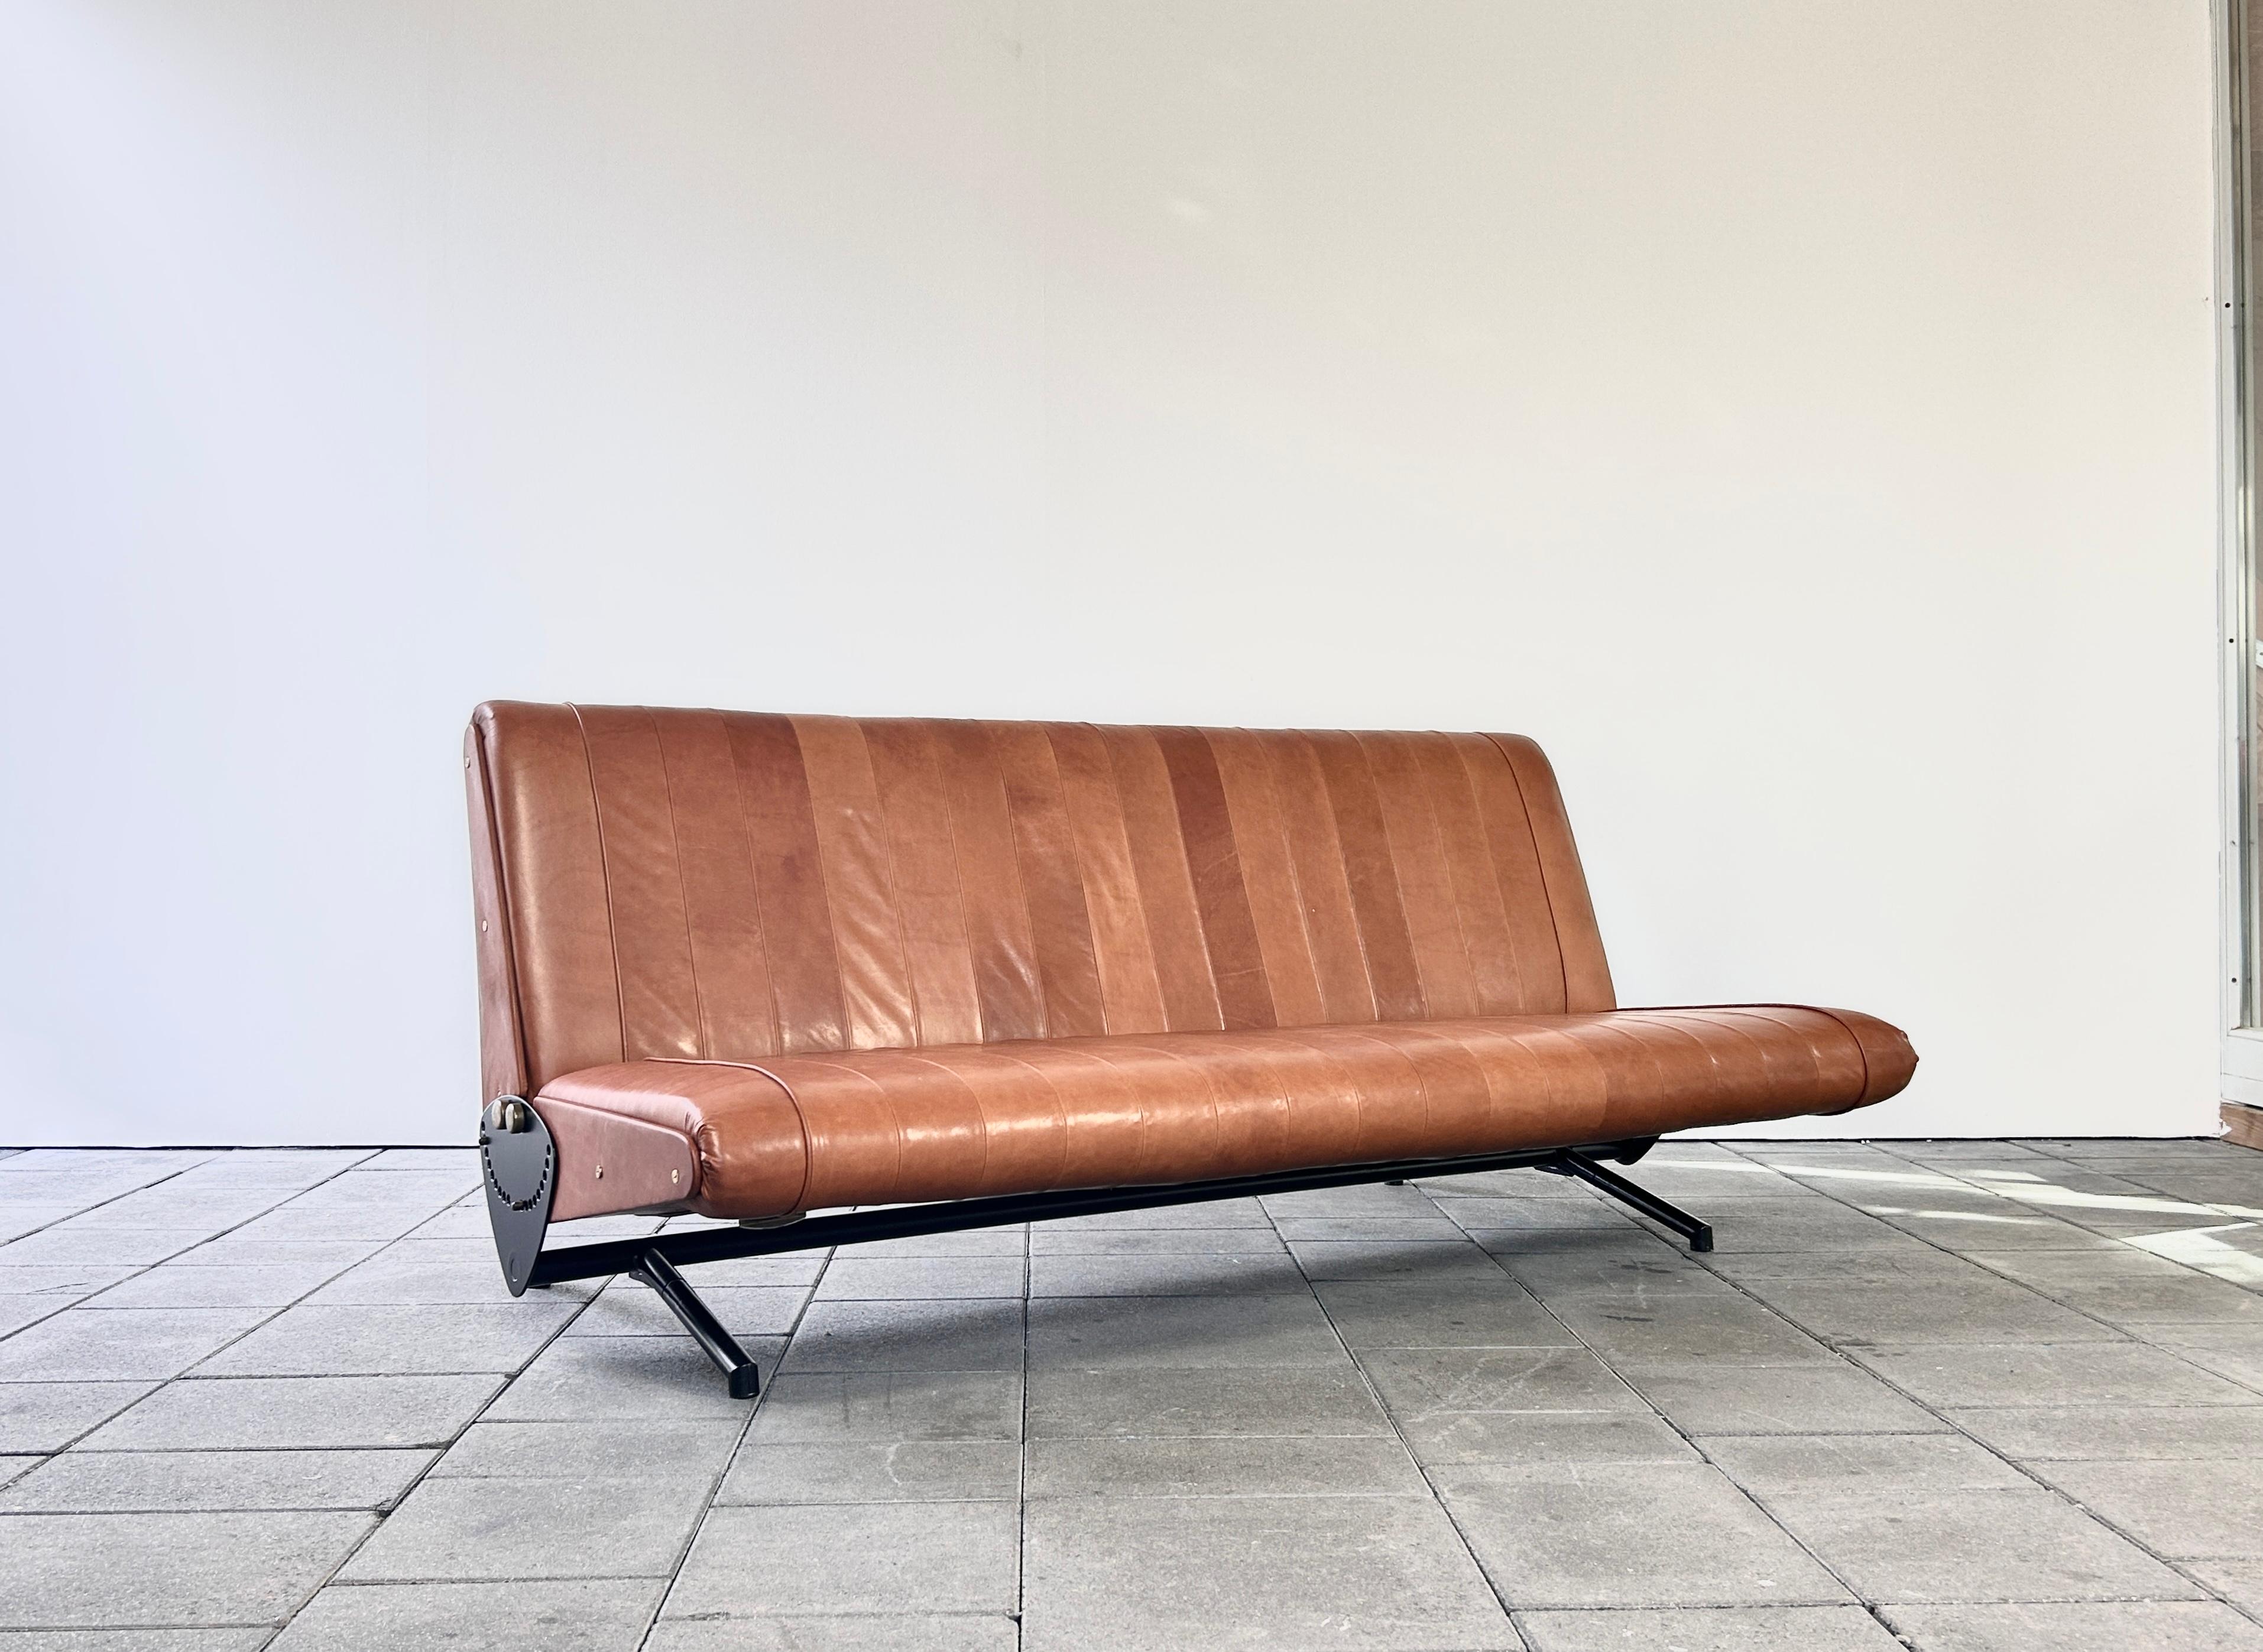 Italian Modern TECNO D70 daybed and sofa designed by Osvaldo Borsani in 1954

beautiful 1960ies edition, re-upholstered in dark-brown cognac anilin leather a year ago, slightly used but very good condition.

Manufactured by Tecno, in Italy ca. 1960